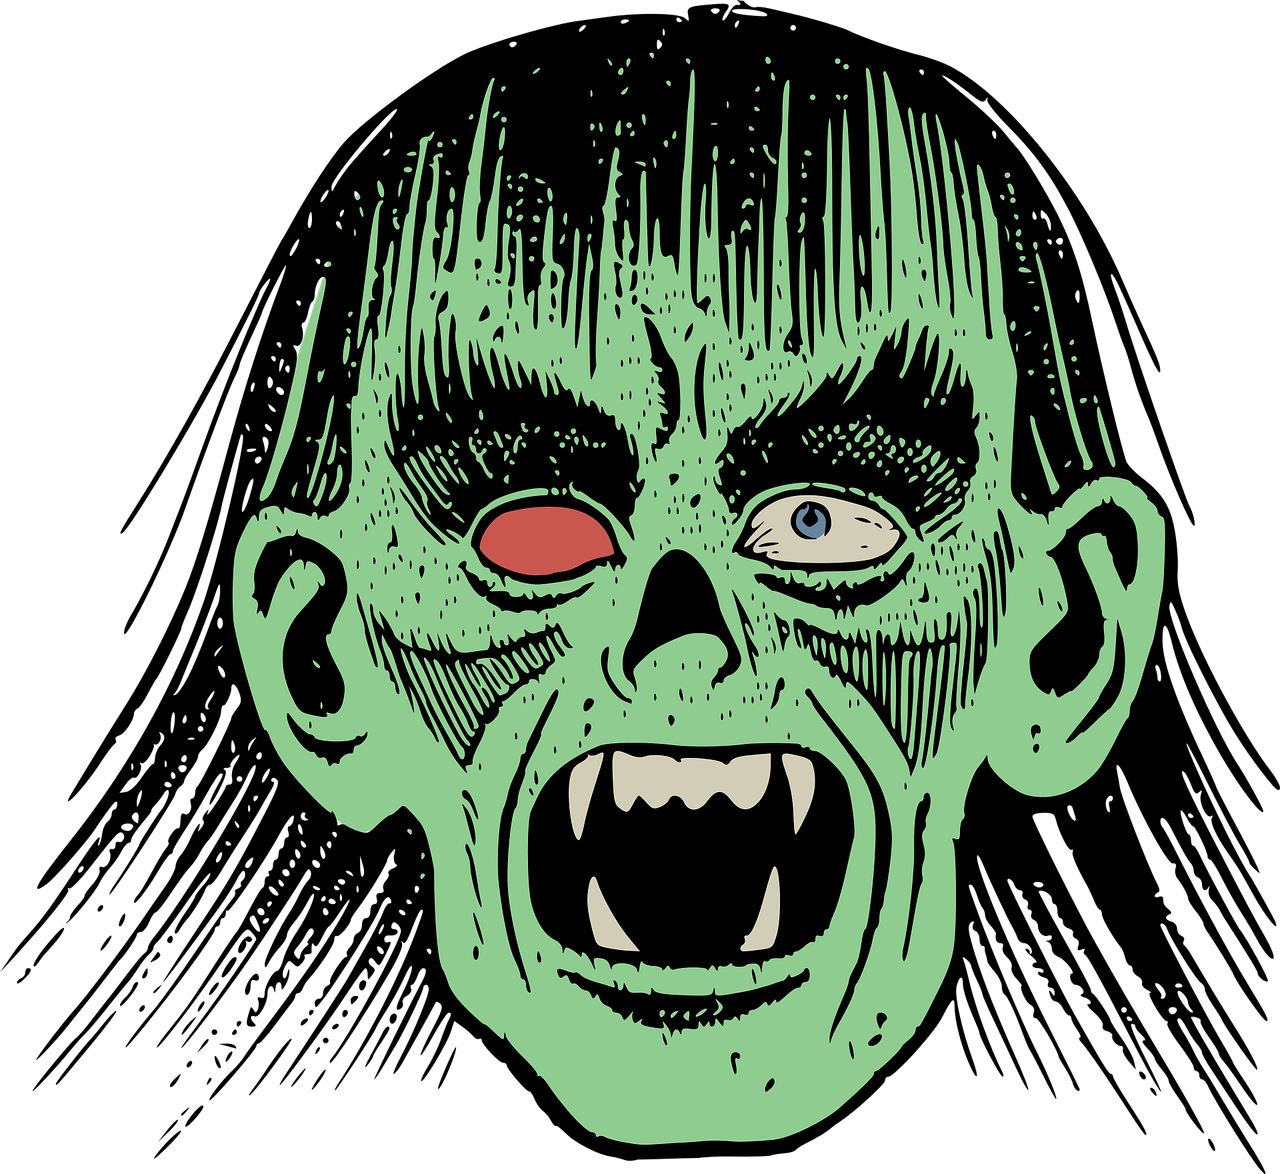 a close up of a zombie face on a black background, an illustration of, by Clark Voorhees, lowbrow, with a large head and big eyes, full color illustration, vintage horror, very coherent image